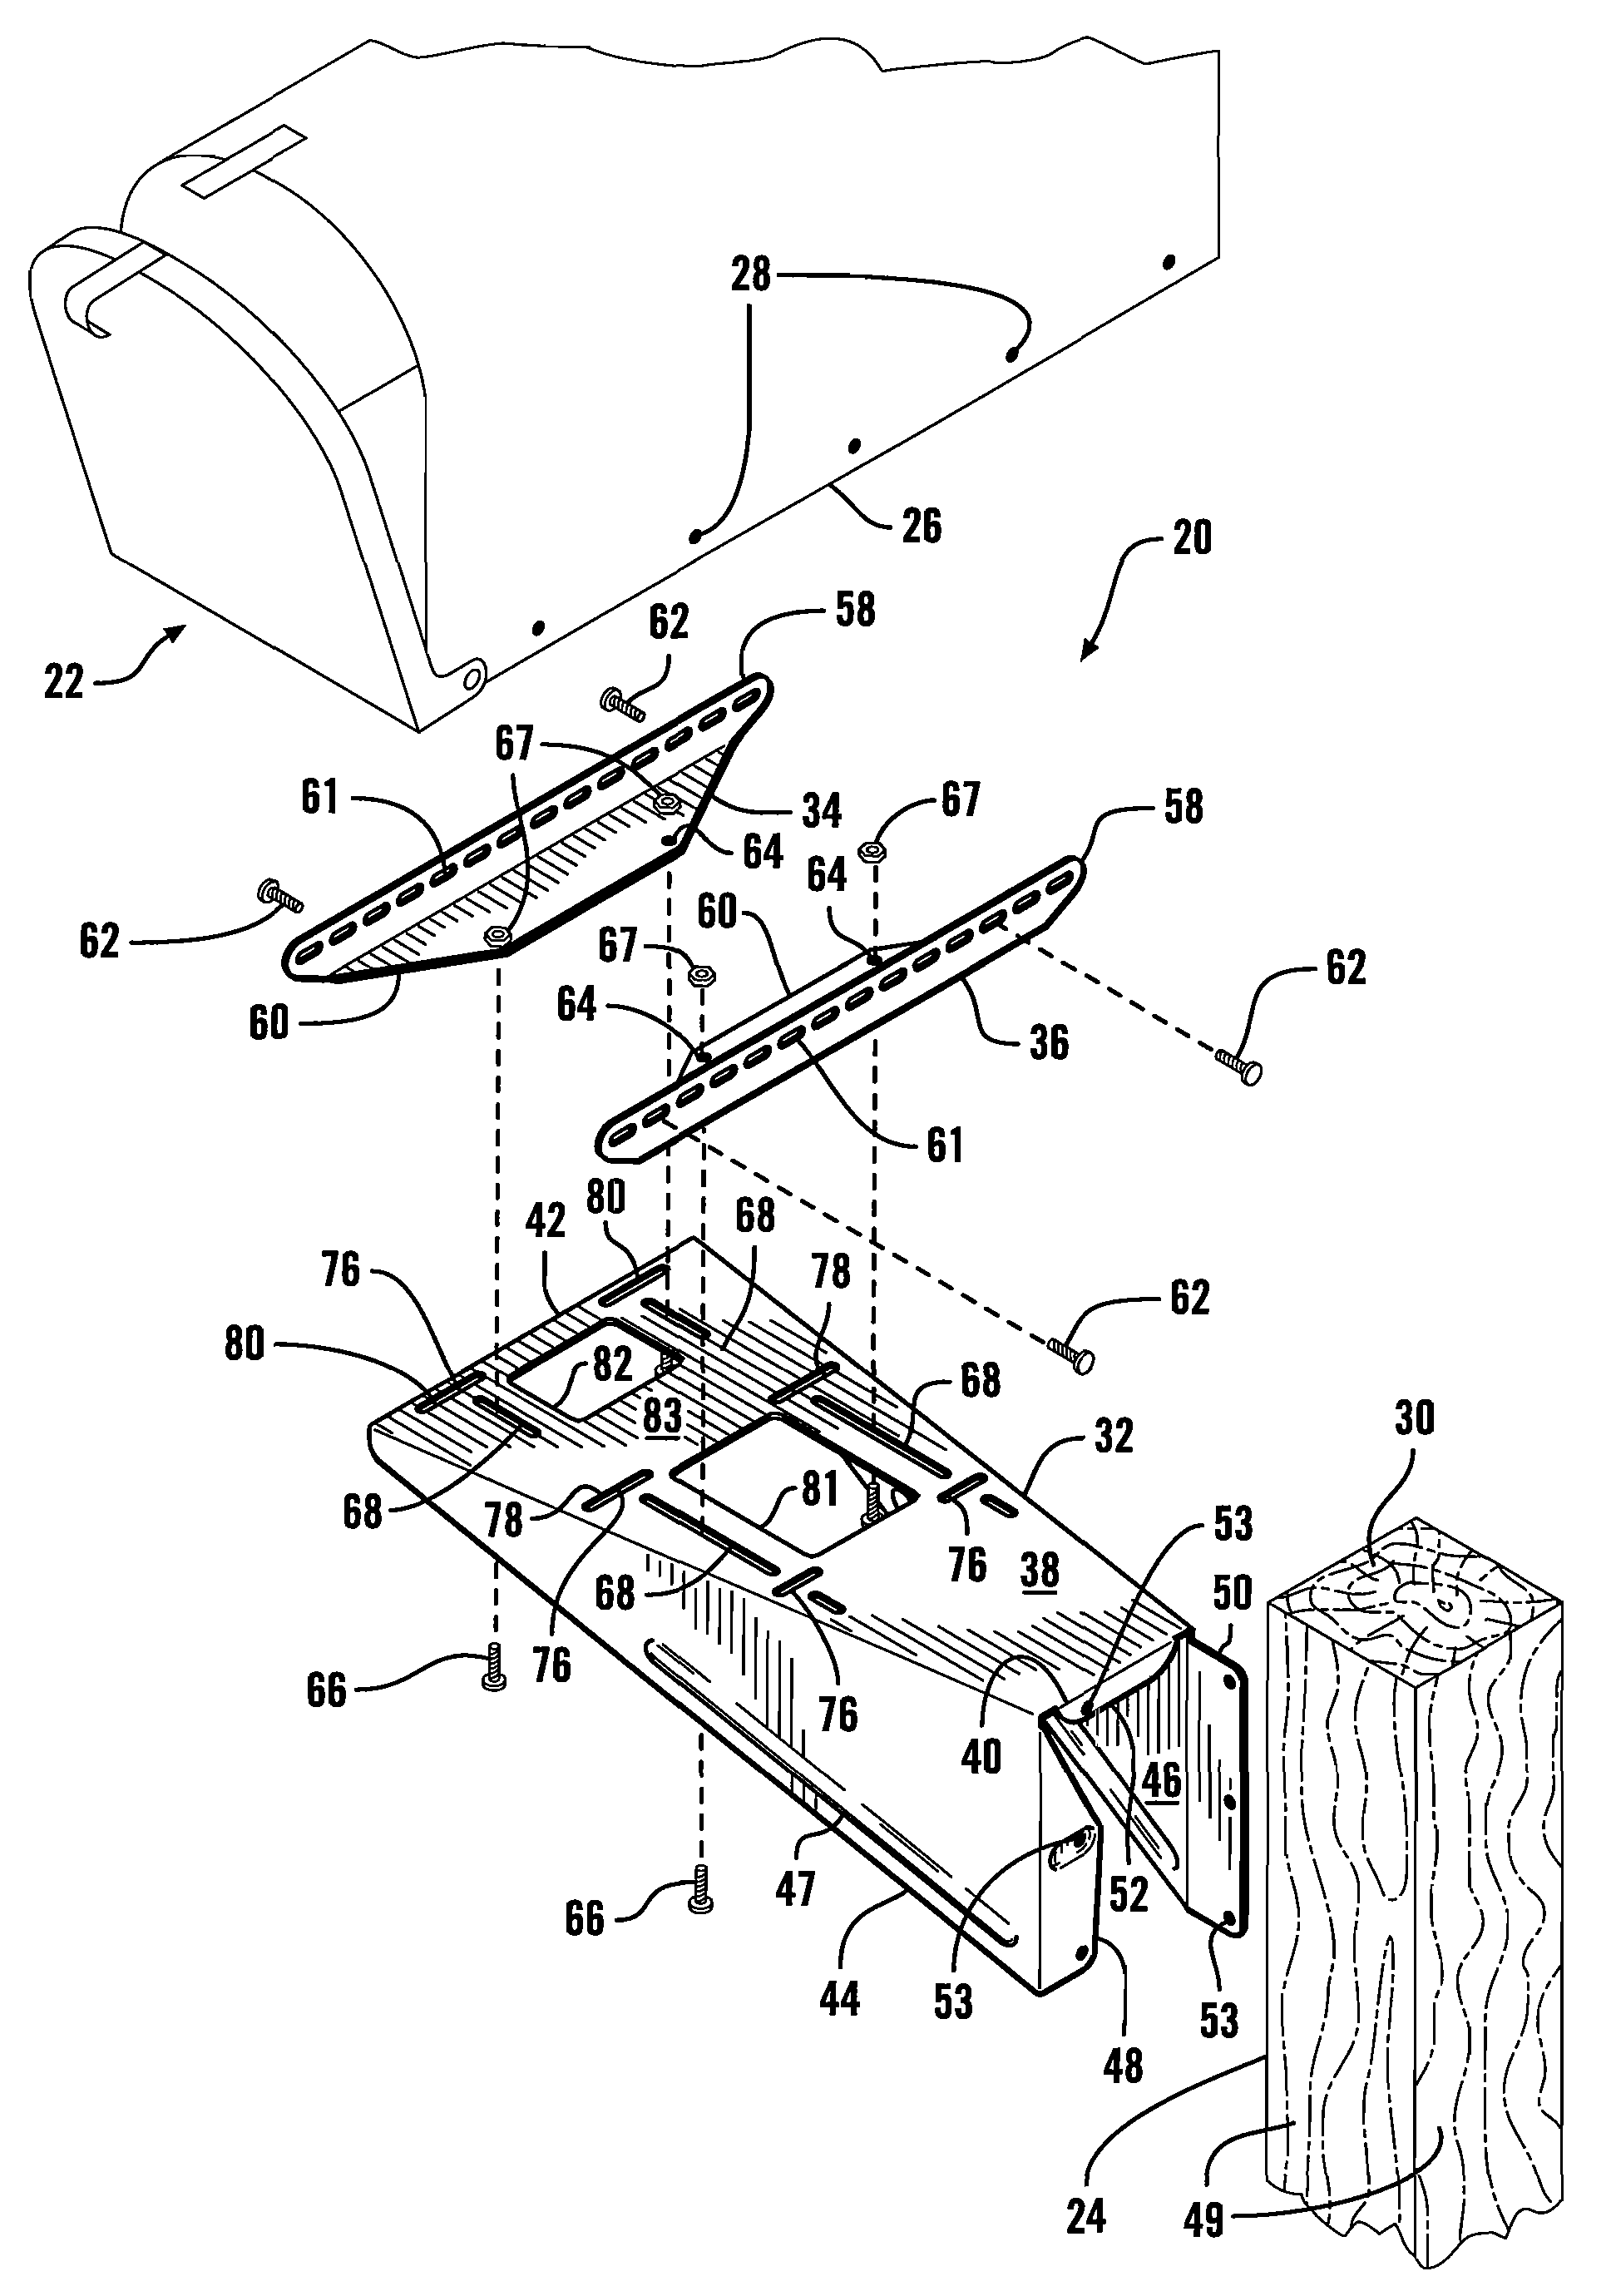 Universal mounting assembly